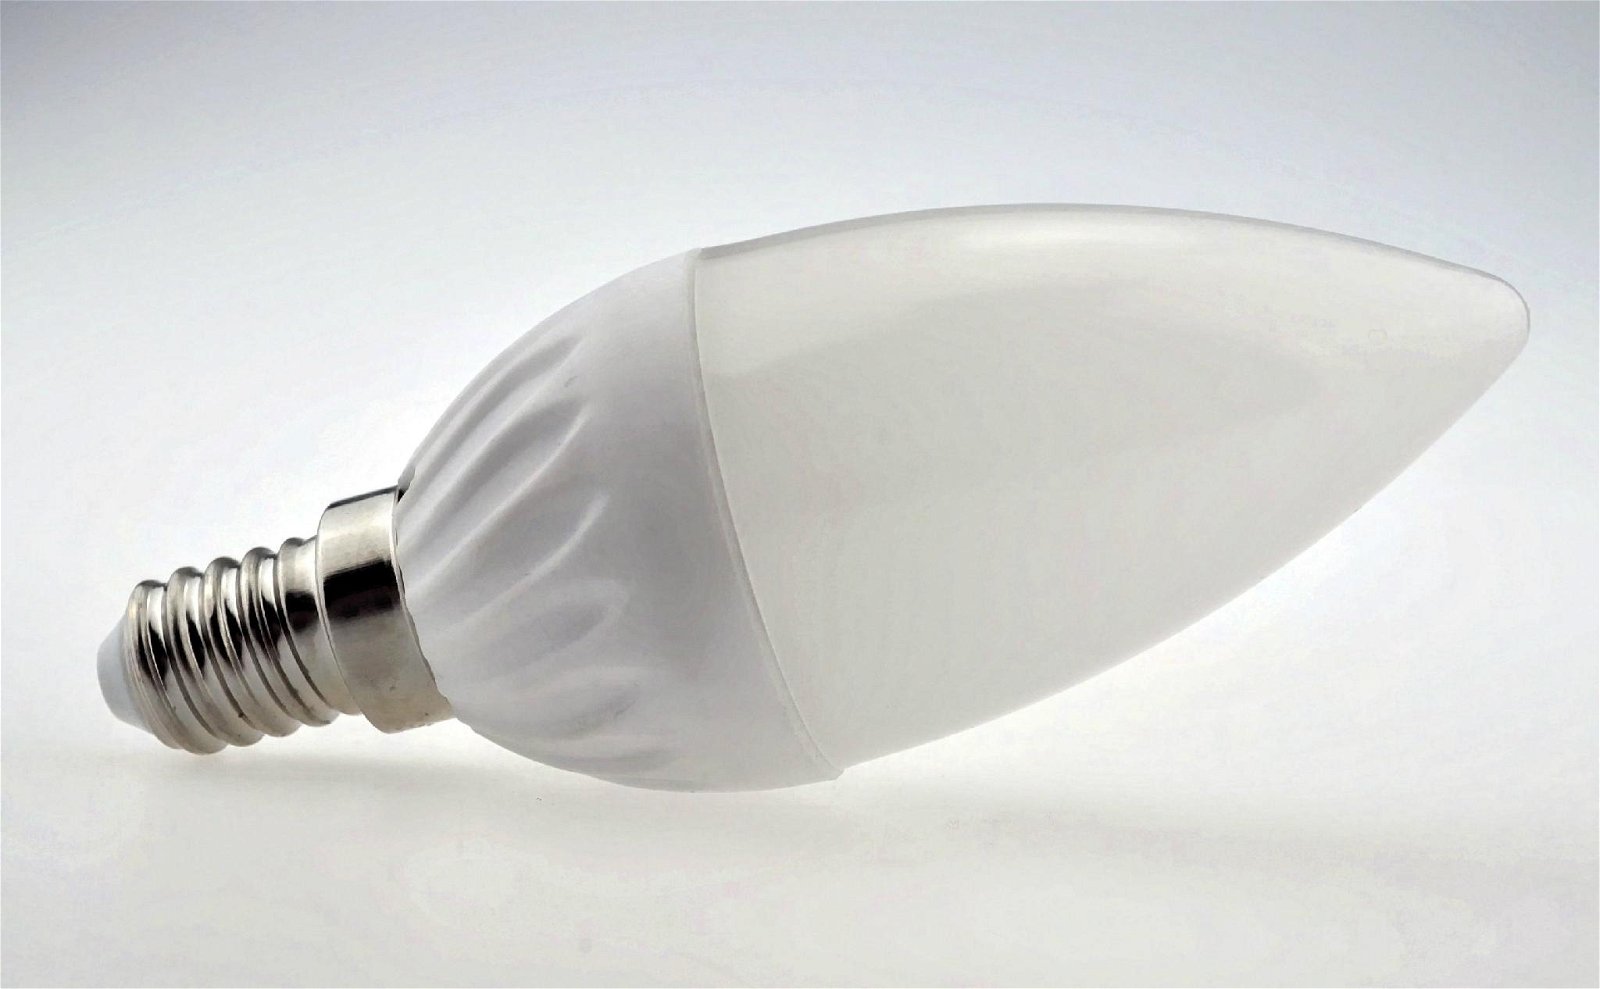 Made in Hikingwin low price plastic home illumination light led bulb light ,A50  5